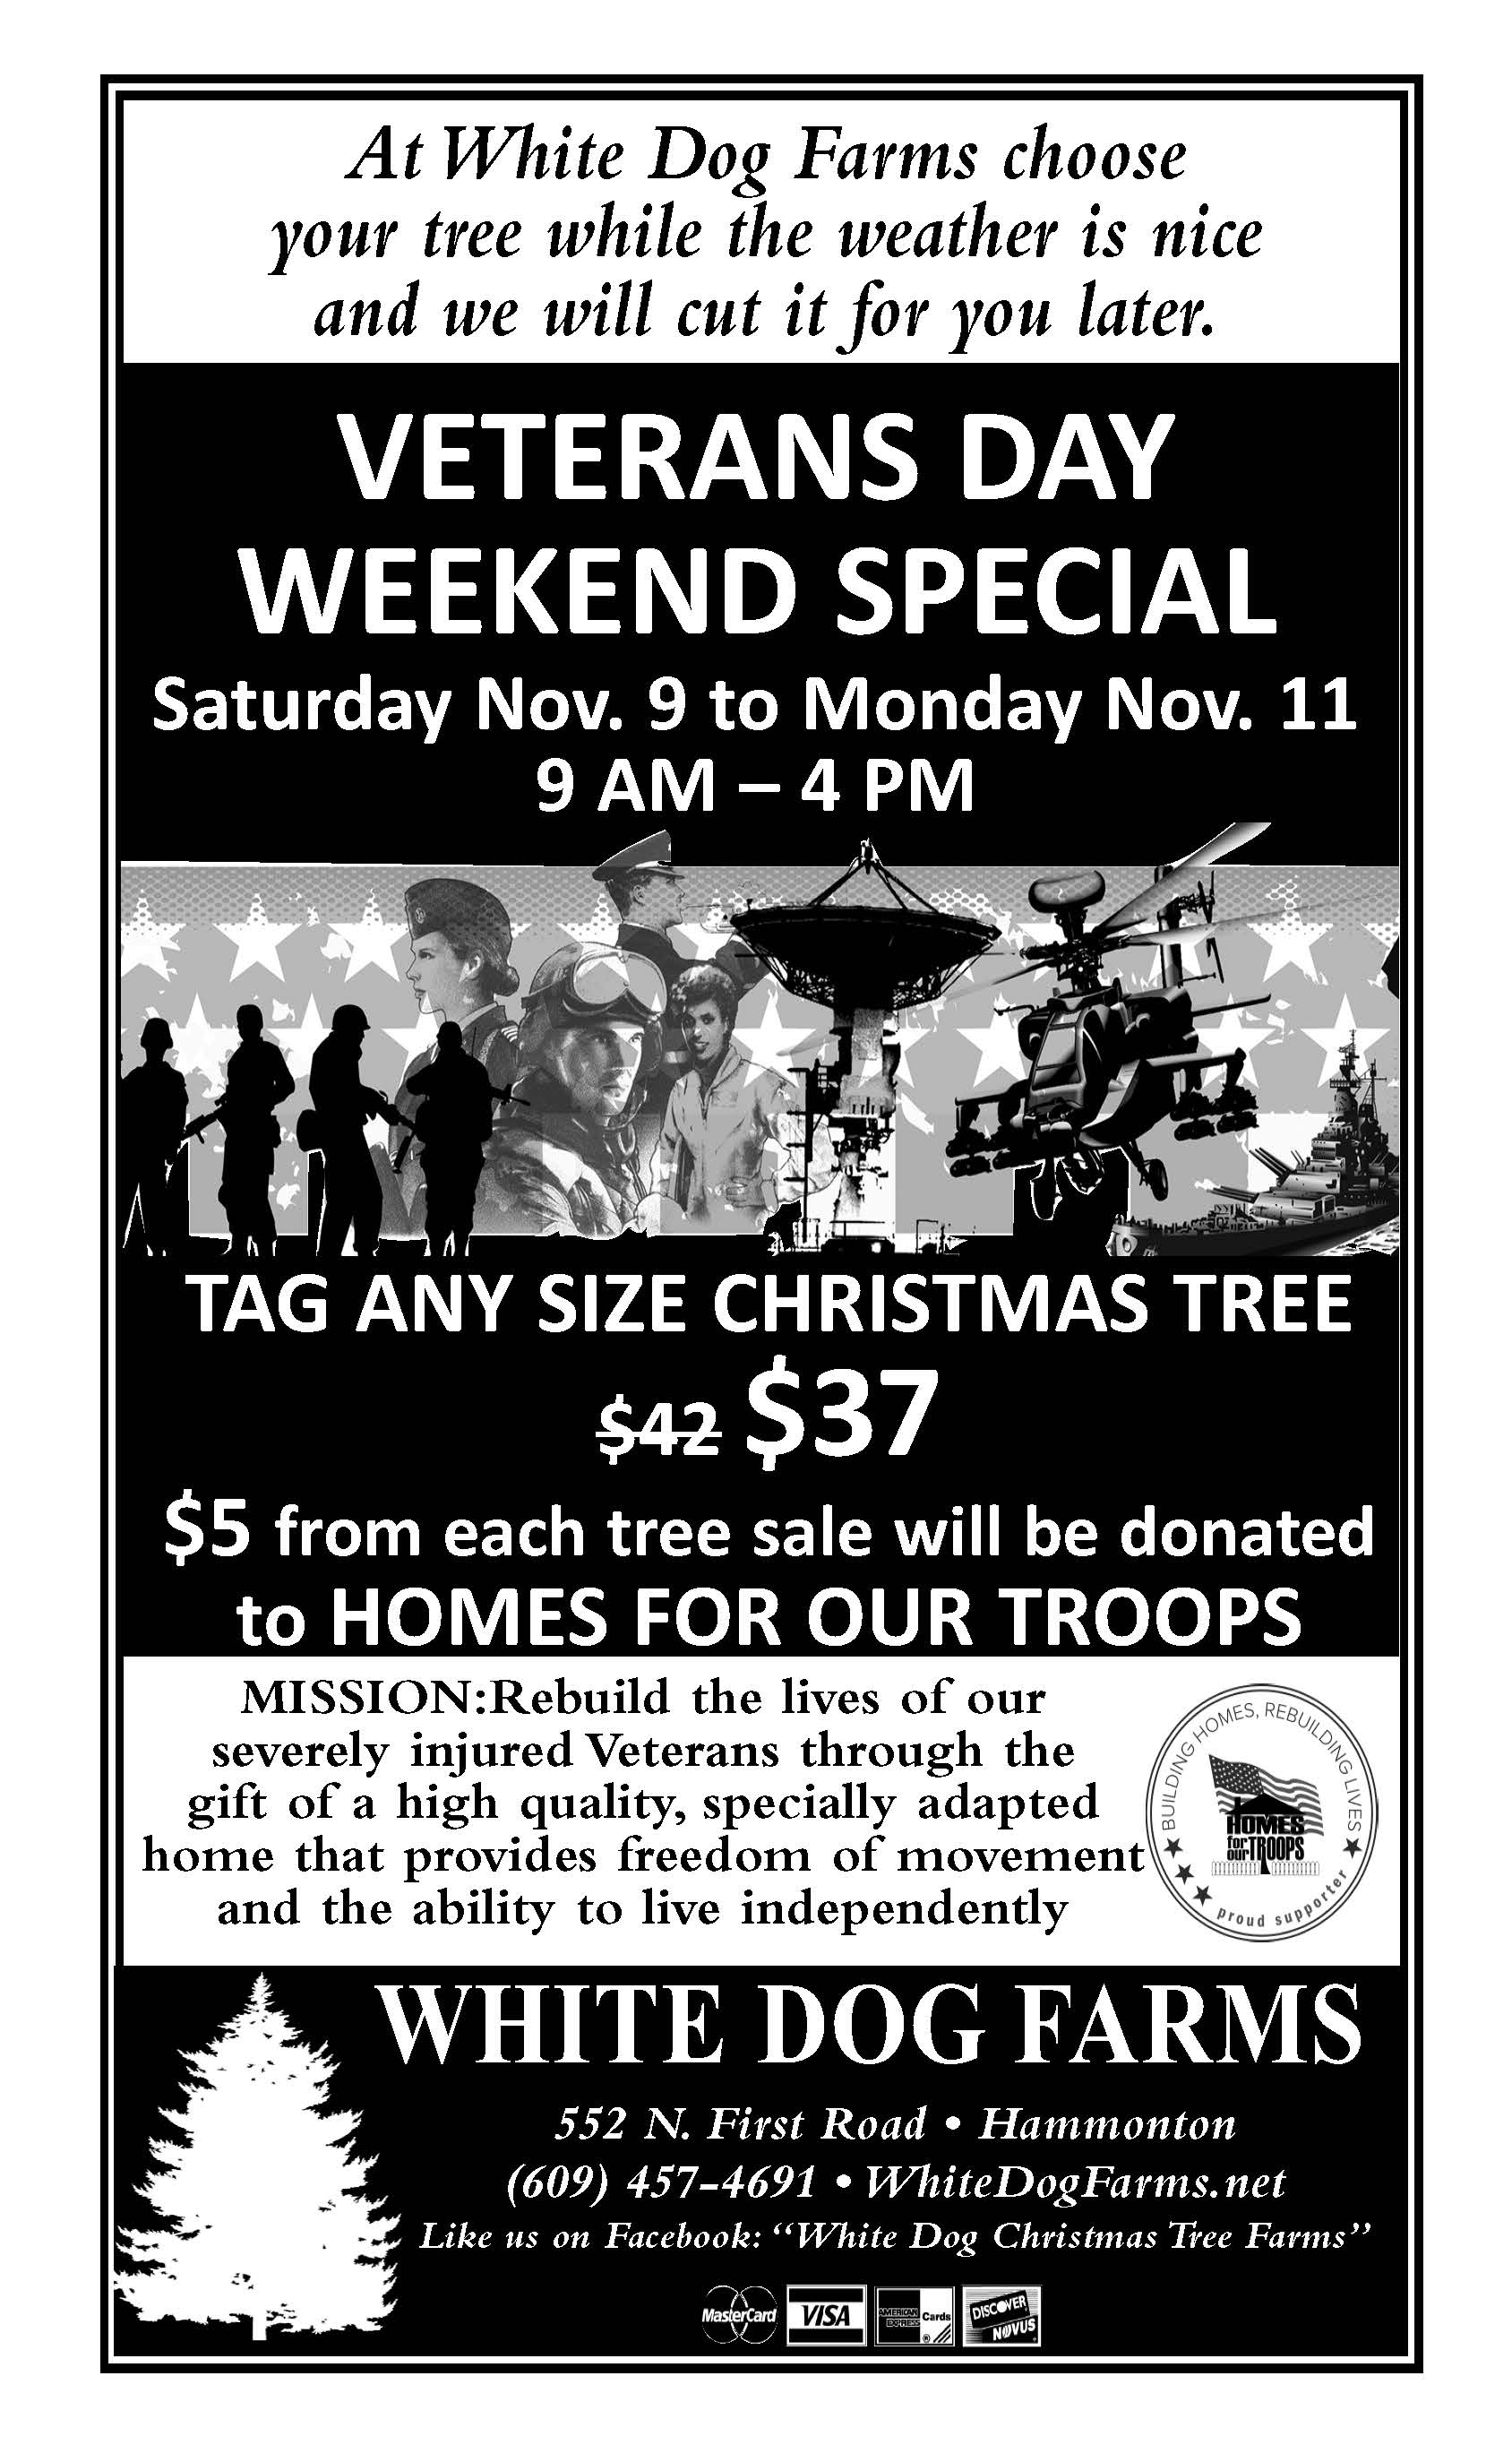 Veterans Day 2013 Weekend Special | White Dog Farms